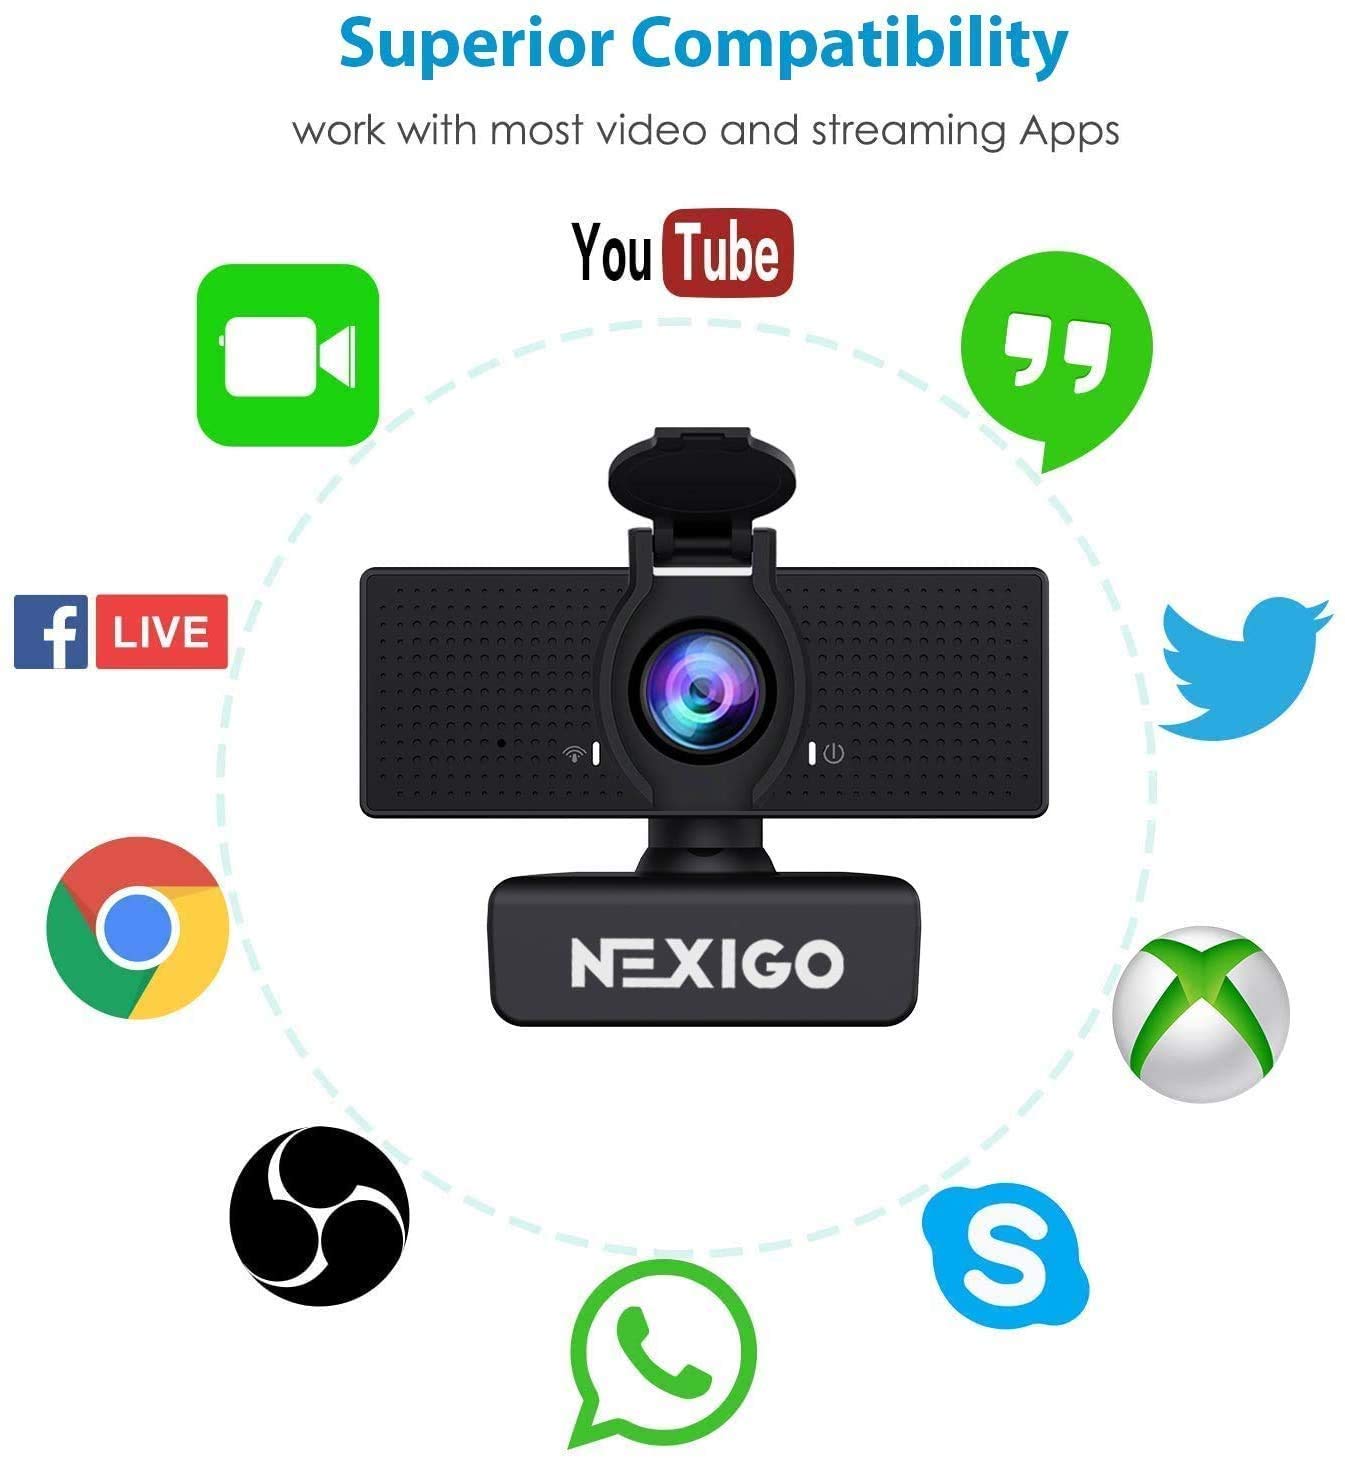 NexiGo N60 1080P Web Camera, HD Webcam with Microphone & Privacy Cover, USB Computer Camera, 110-degree Wide Angle, Plug and Play, for Zoom/Skype/Teams/OBS, Conferencing and Video Calling (Renewed)